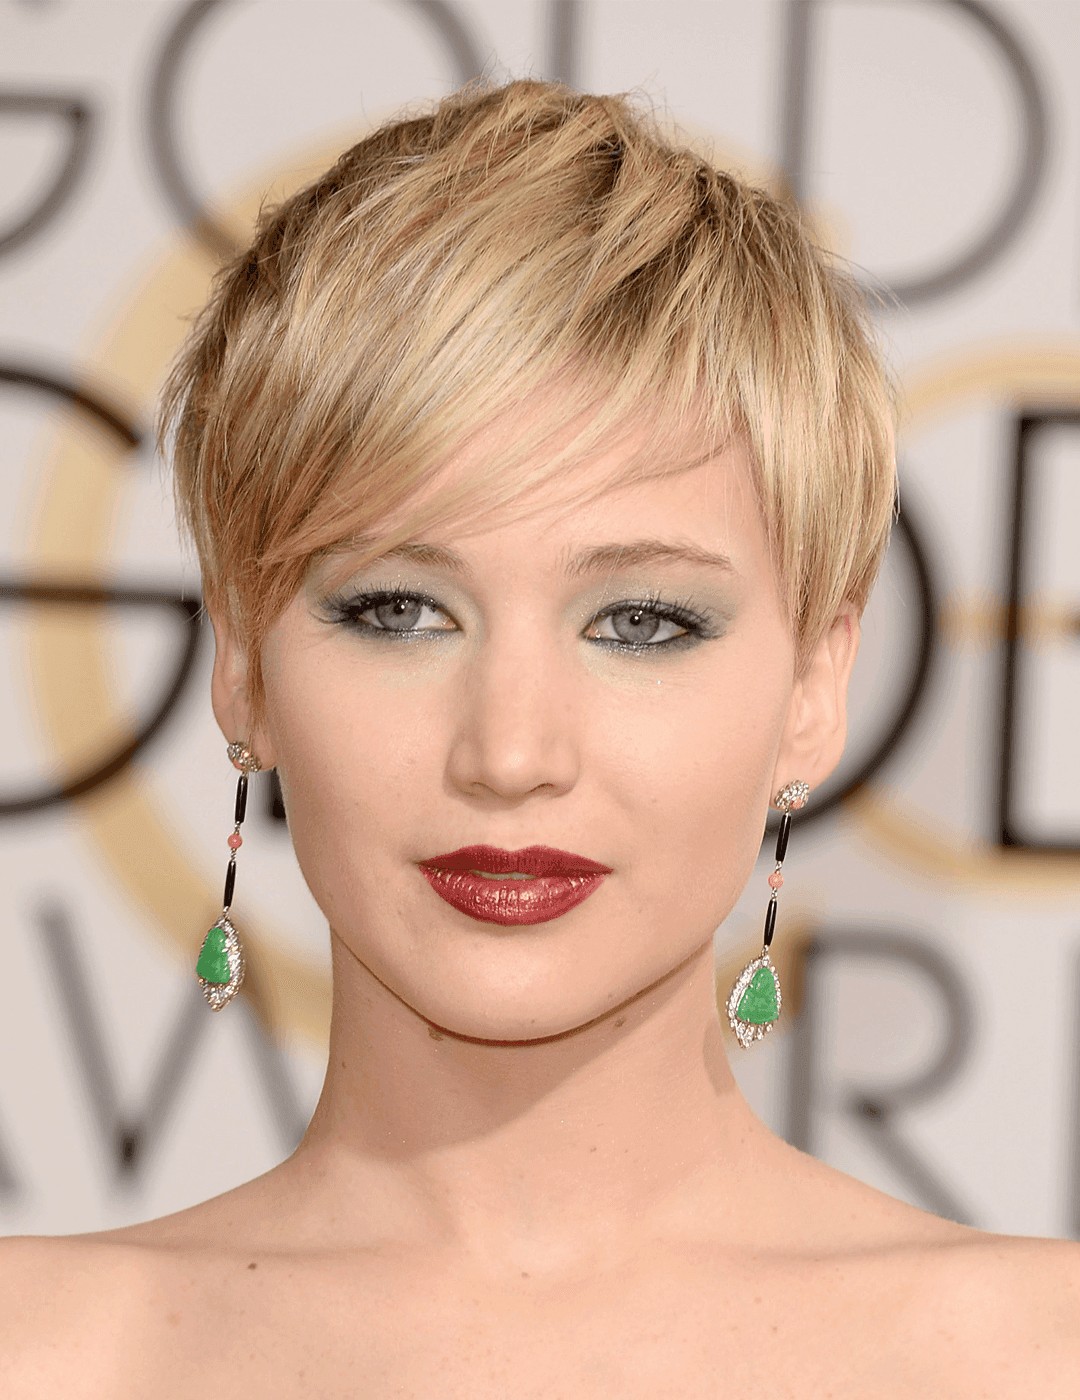 Jennifer Lawrence rocking a sultry makeup look, dangling emerald earrings, and messy pixie hairstyle